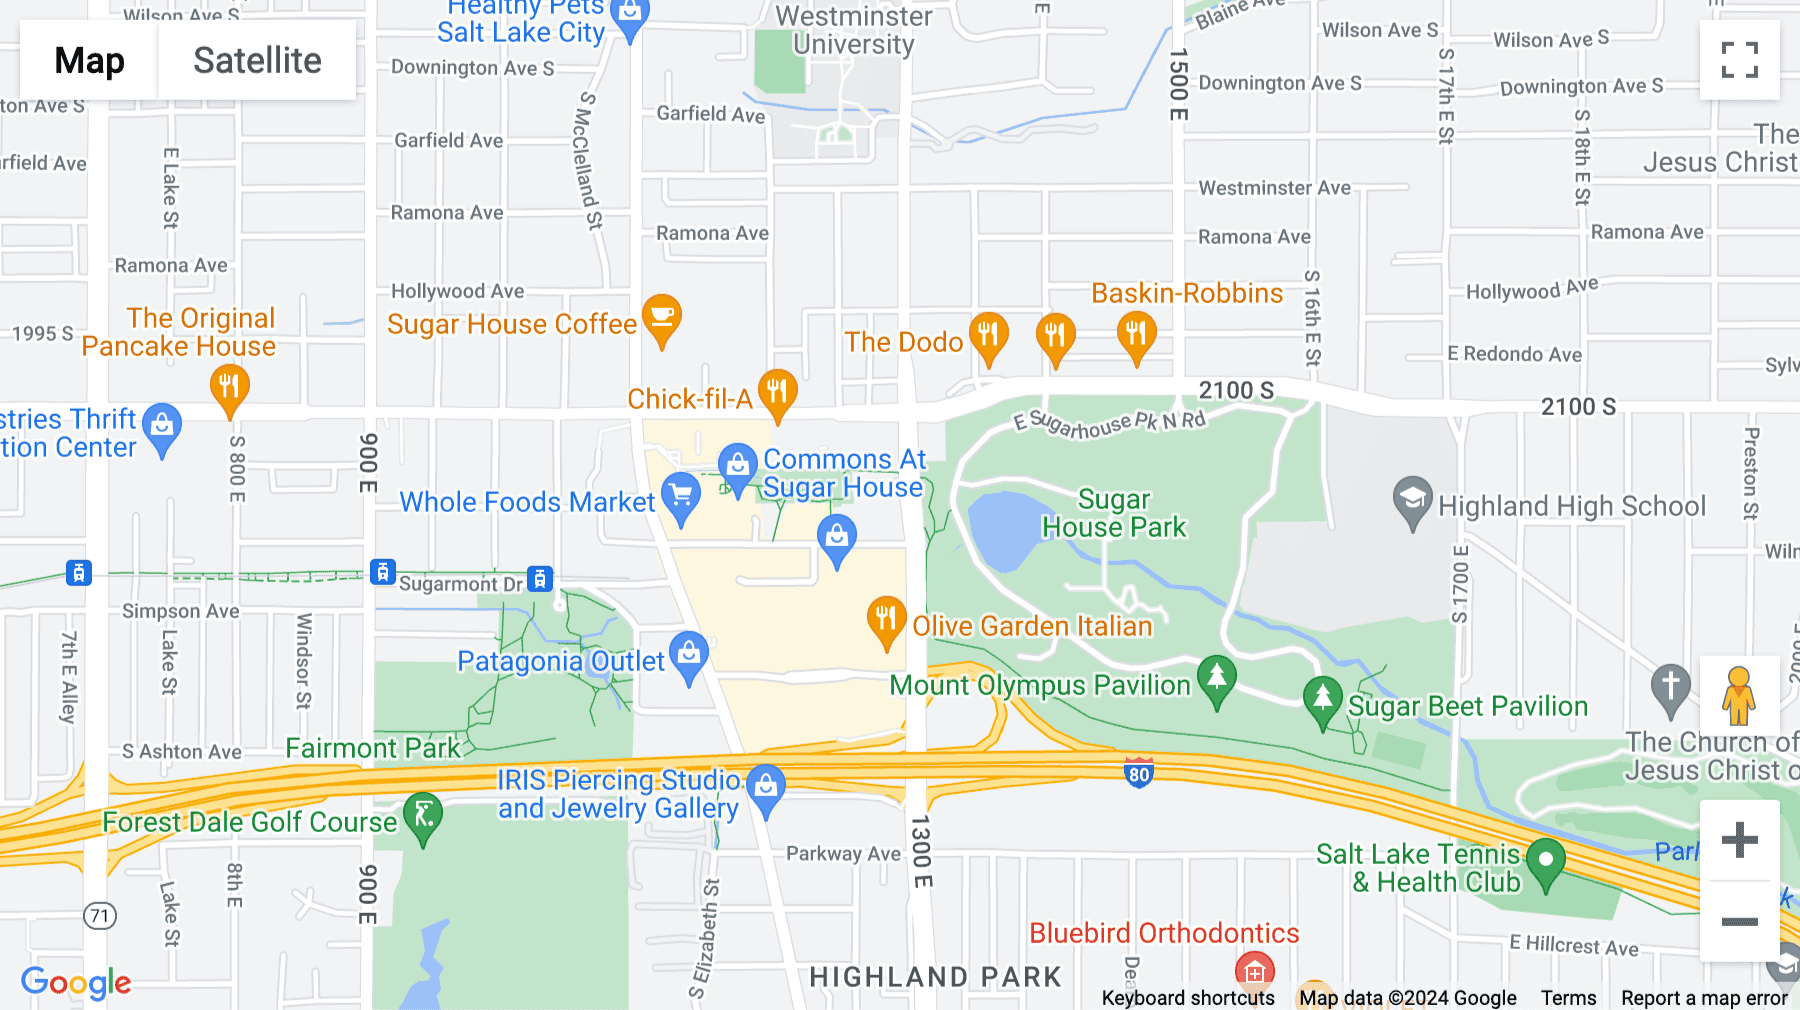 Click for interative map of 2150 S 1300 E, Suite 500, Salt Lake City